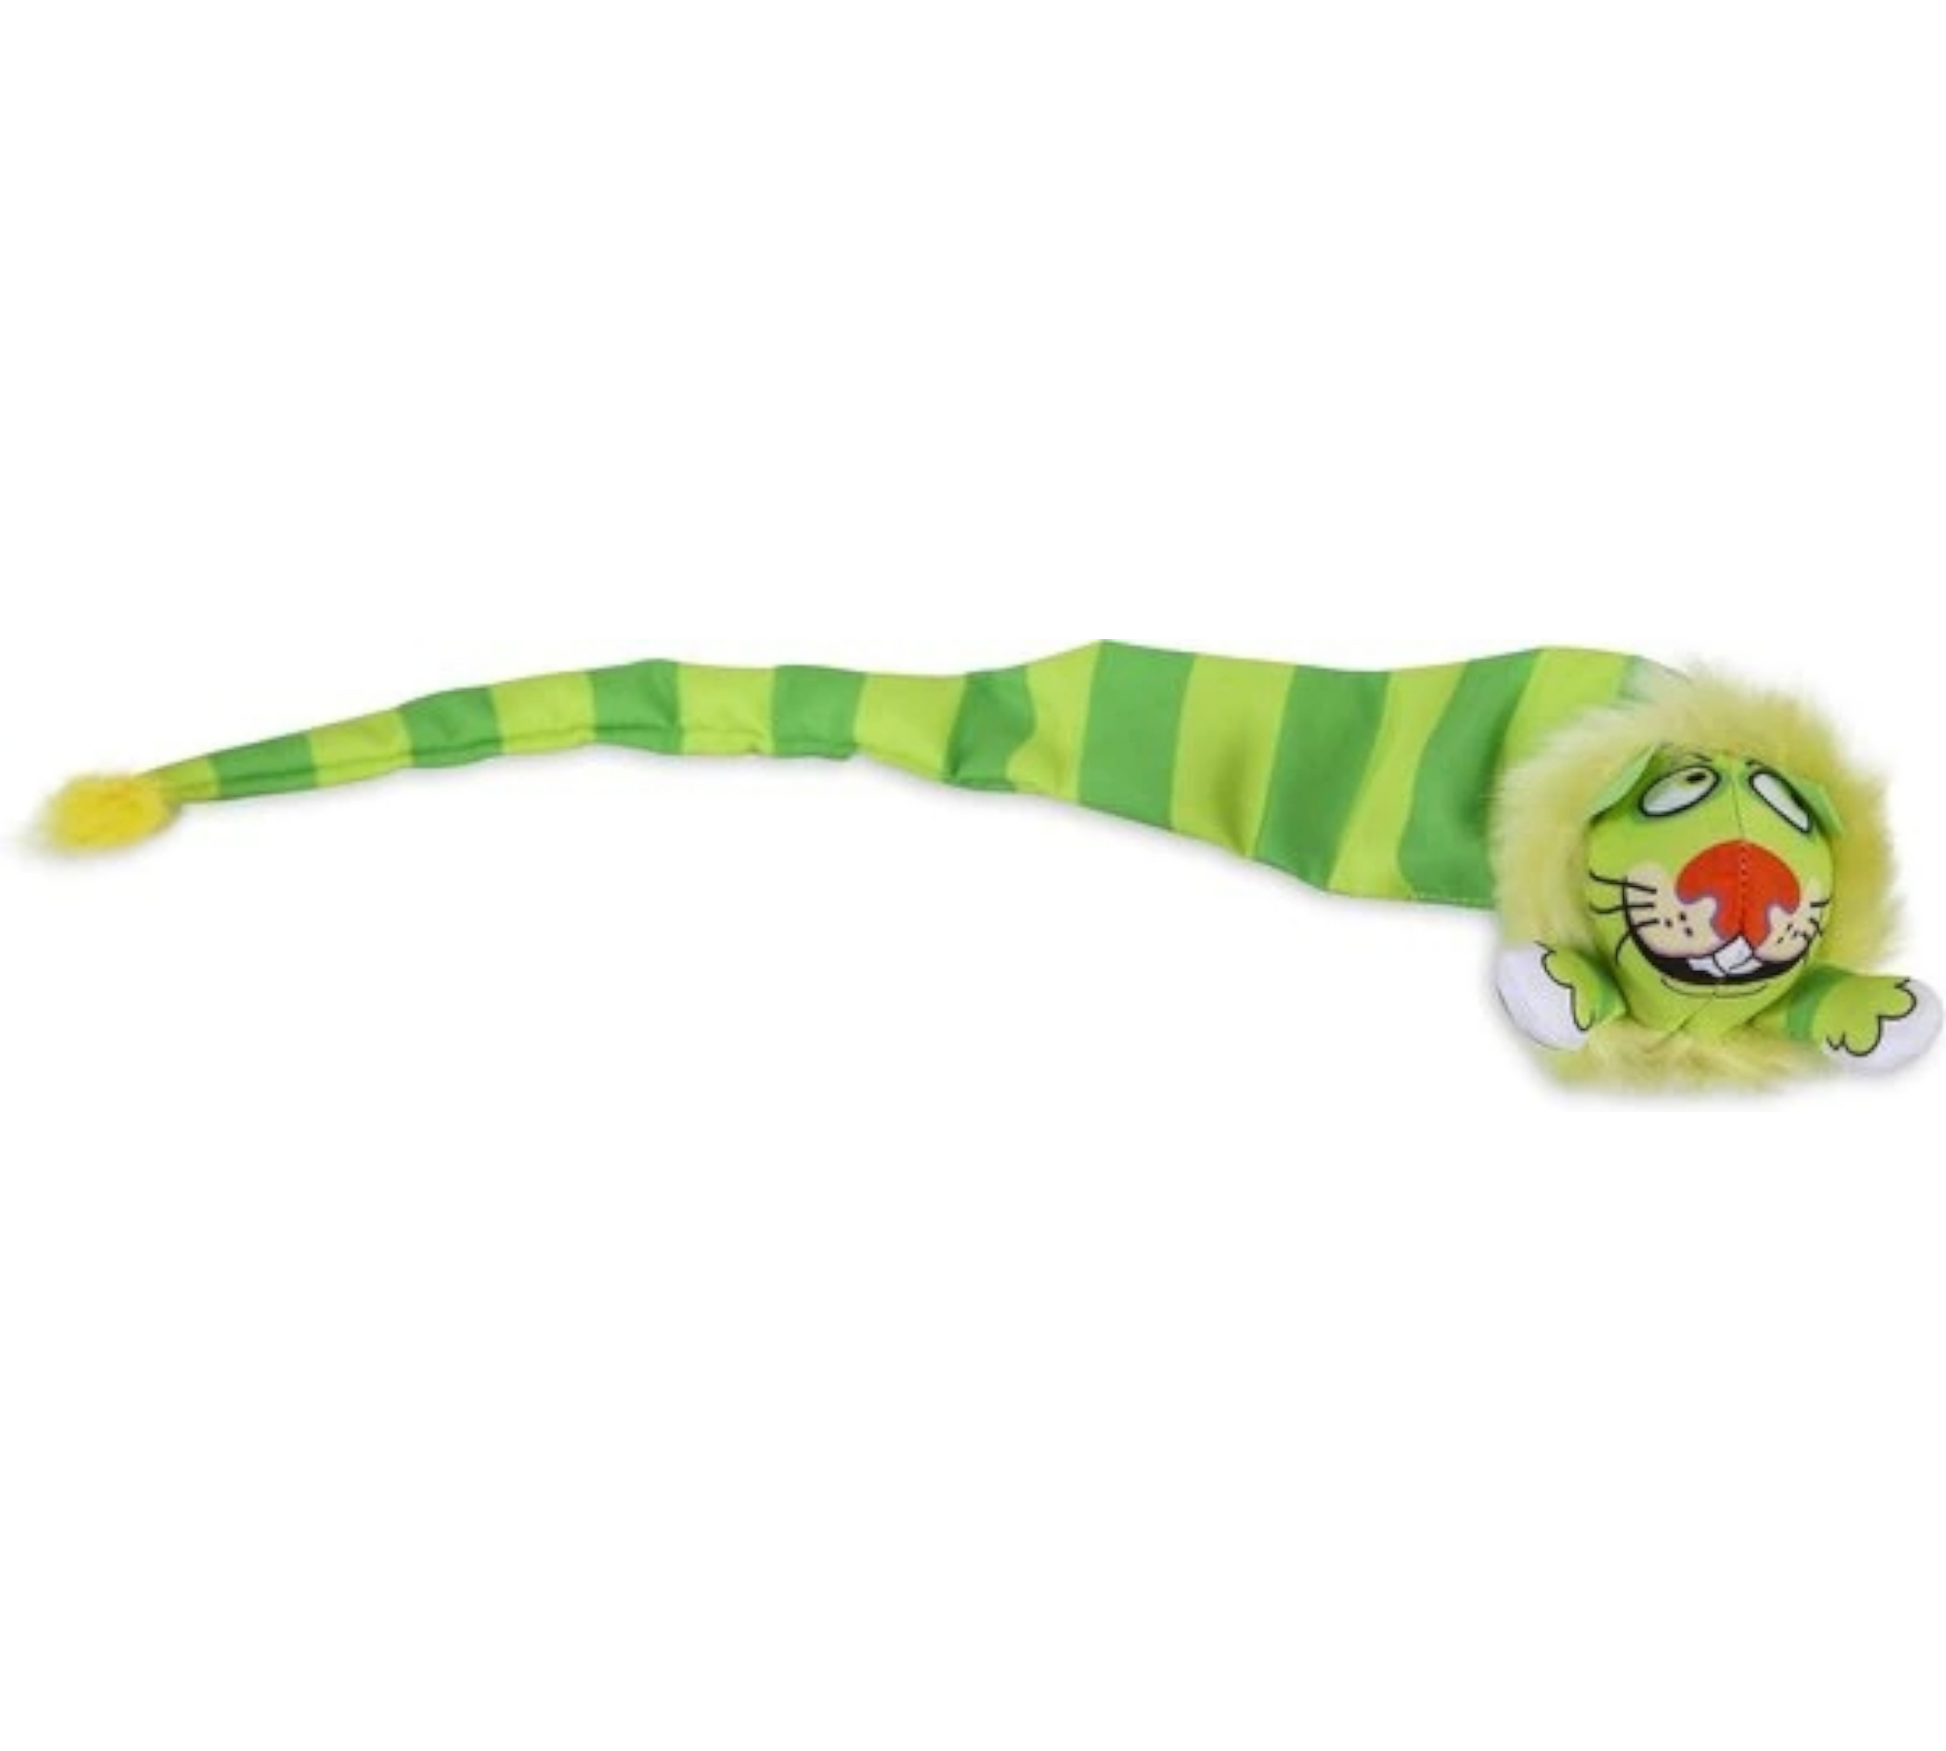 Canine's World Cat Balls & Chaser Toys Fat Cat Classic Tail Chaser Cat Toy, Color Varies Fat Cat